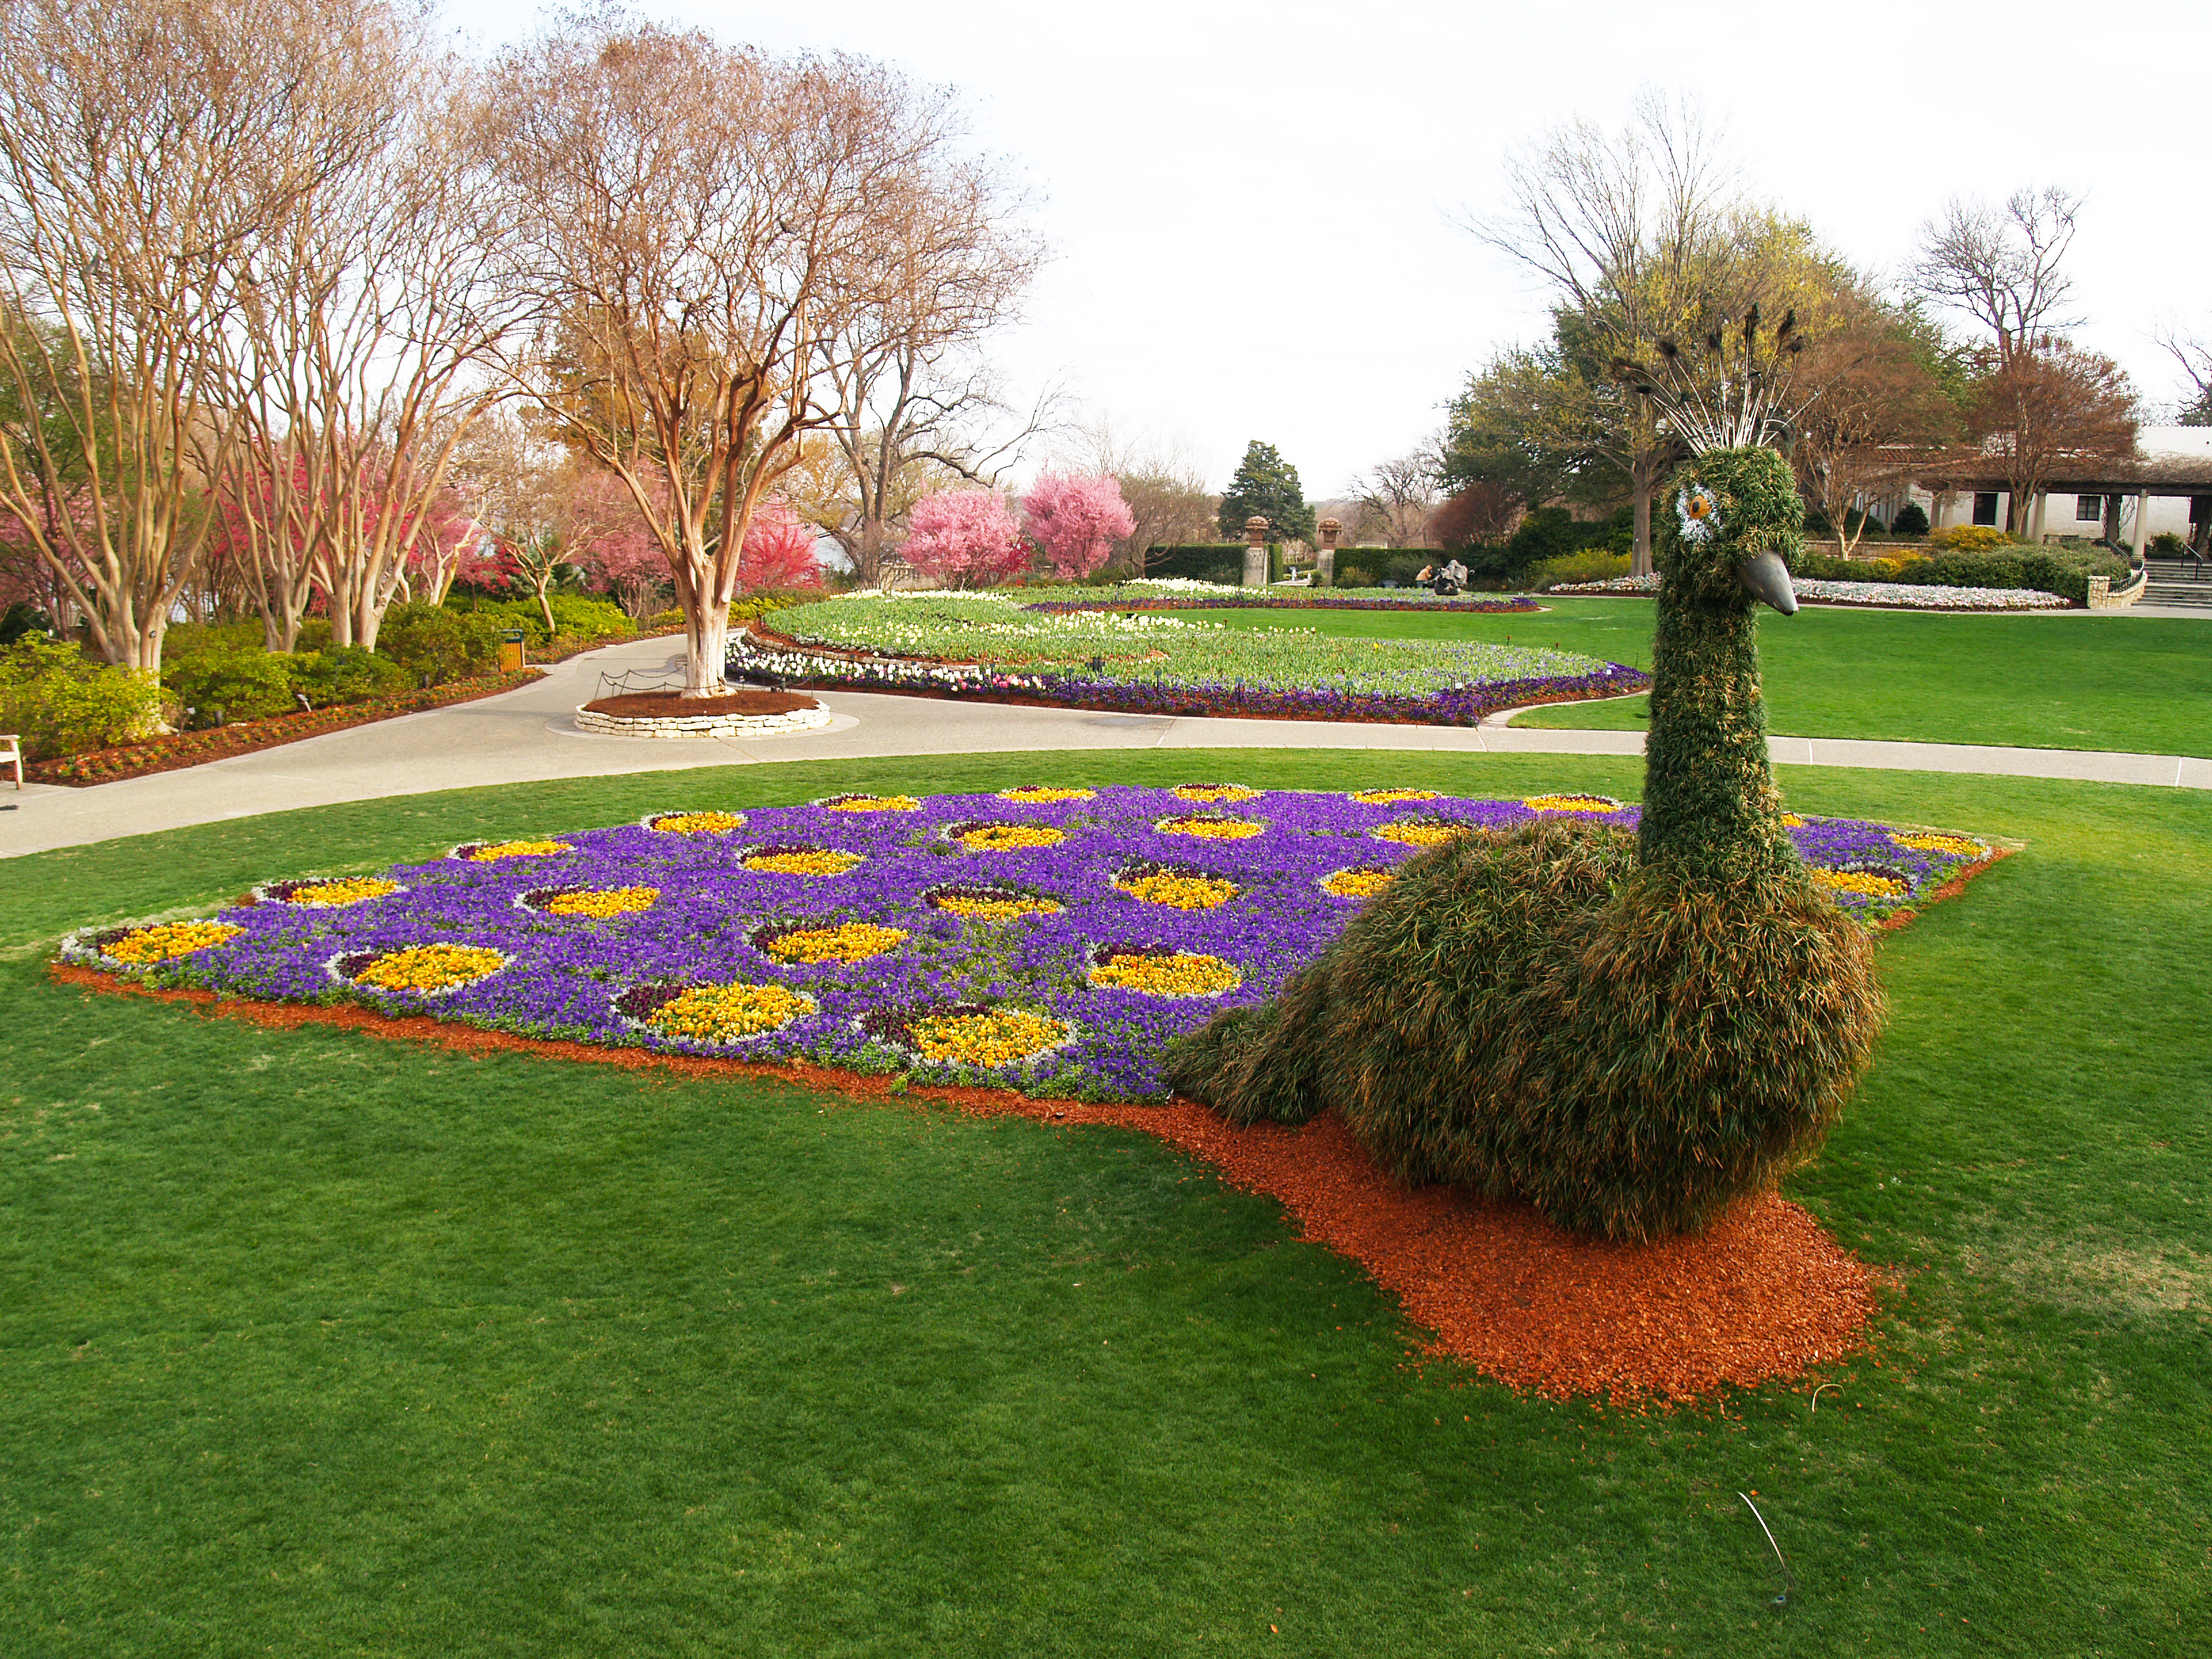 Dallas Arboretum and Botanical Garden, Wednesday, January 12, 2022, Press release picture